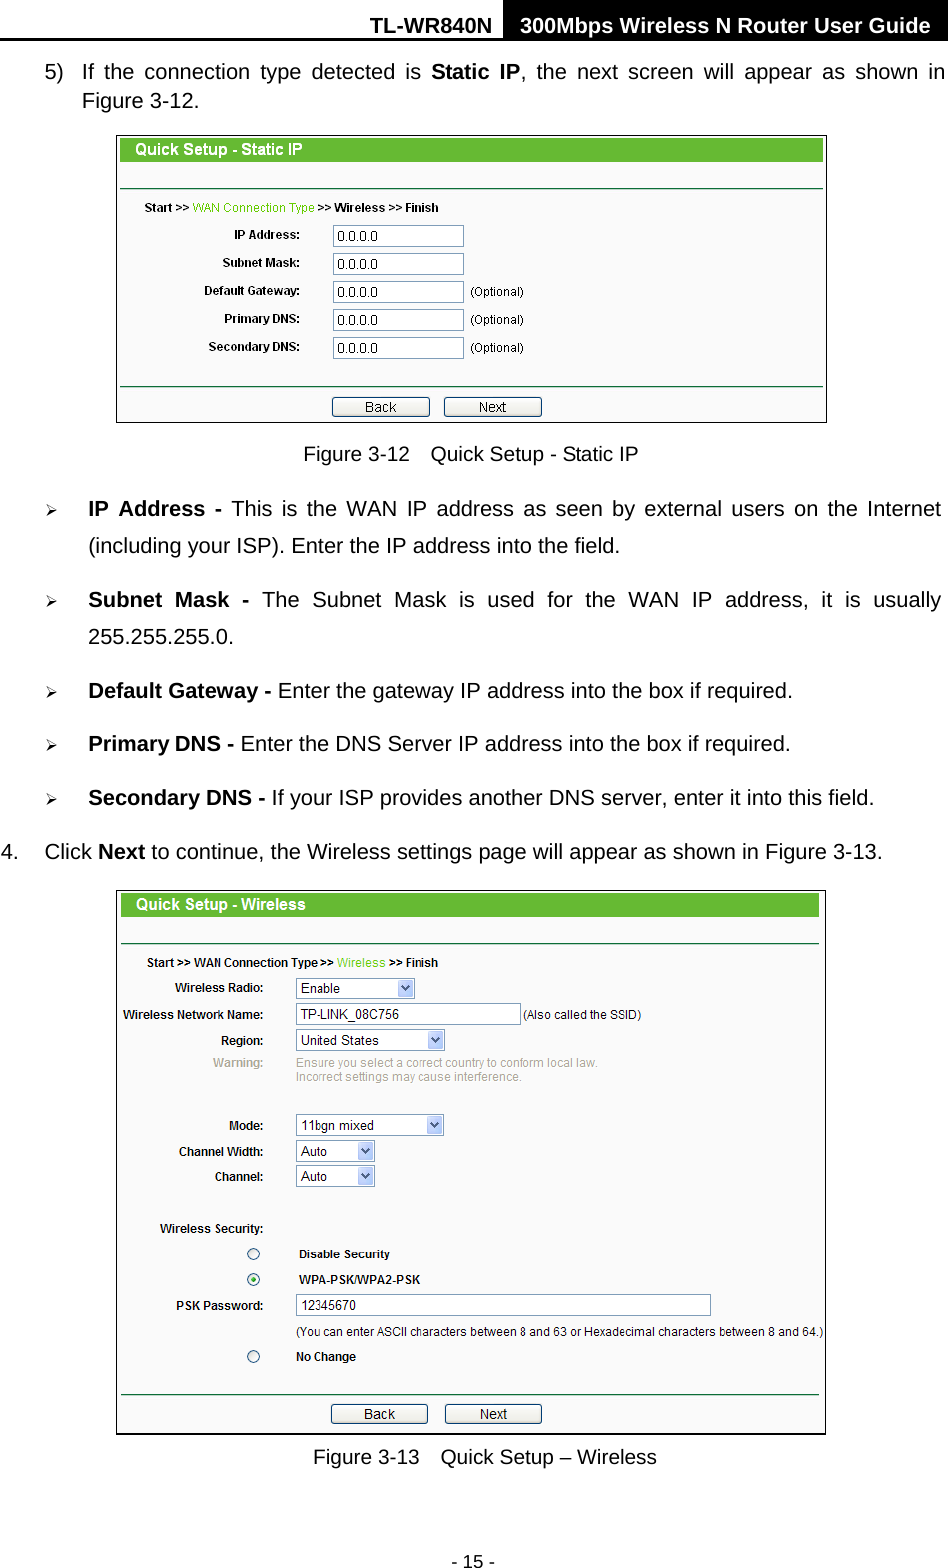 TL-WR840N 300Mbps Wireless N Router User Guide  - 15 - 5)  If the connection type detected is Static IP,  the next screen will appear as shown in Figure 3-12.    Figure 3-12  Quick Setup - Static IP  IP Address - This is the WAN IP address as seen by external users on the Internet (including your ISP). Enter the IP address into the field.  Subnet Mask -  The Subnet Mask is used for the WAN IP address, it is usually 255.255.255.0.  Default Gateway - Enter the gateway IP address into the box if required.  Primary DNS - Enter the DNS Server IP address into the box if required.  Secondary DNS - If your ISP provides another DNS server, enter it into this field. 4.  Click Next to continue, the Wireless settings page will appear as shown in Figure 3-13.  Figure 3-13  Quick Setup – Wireless   